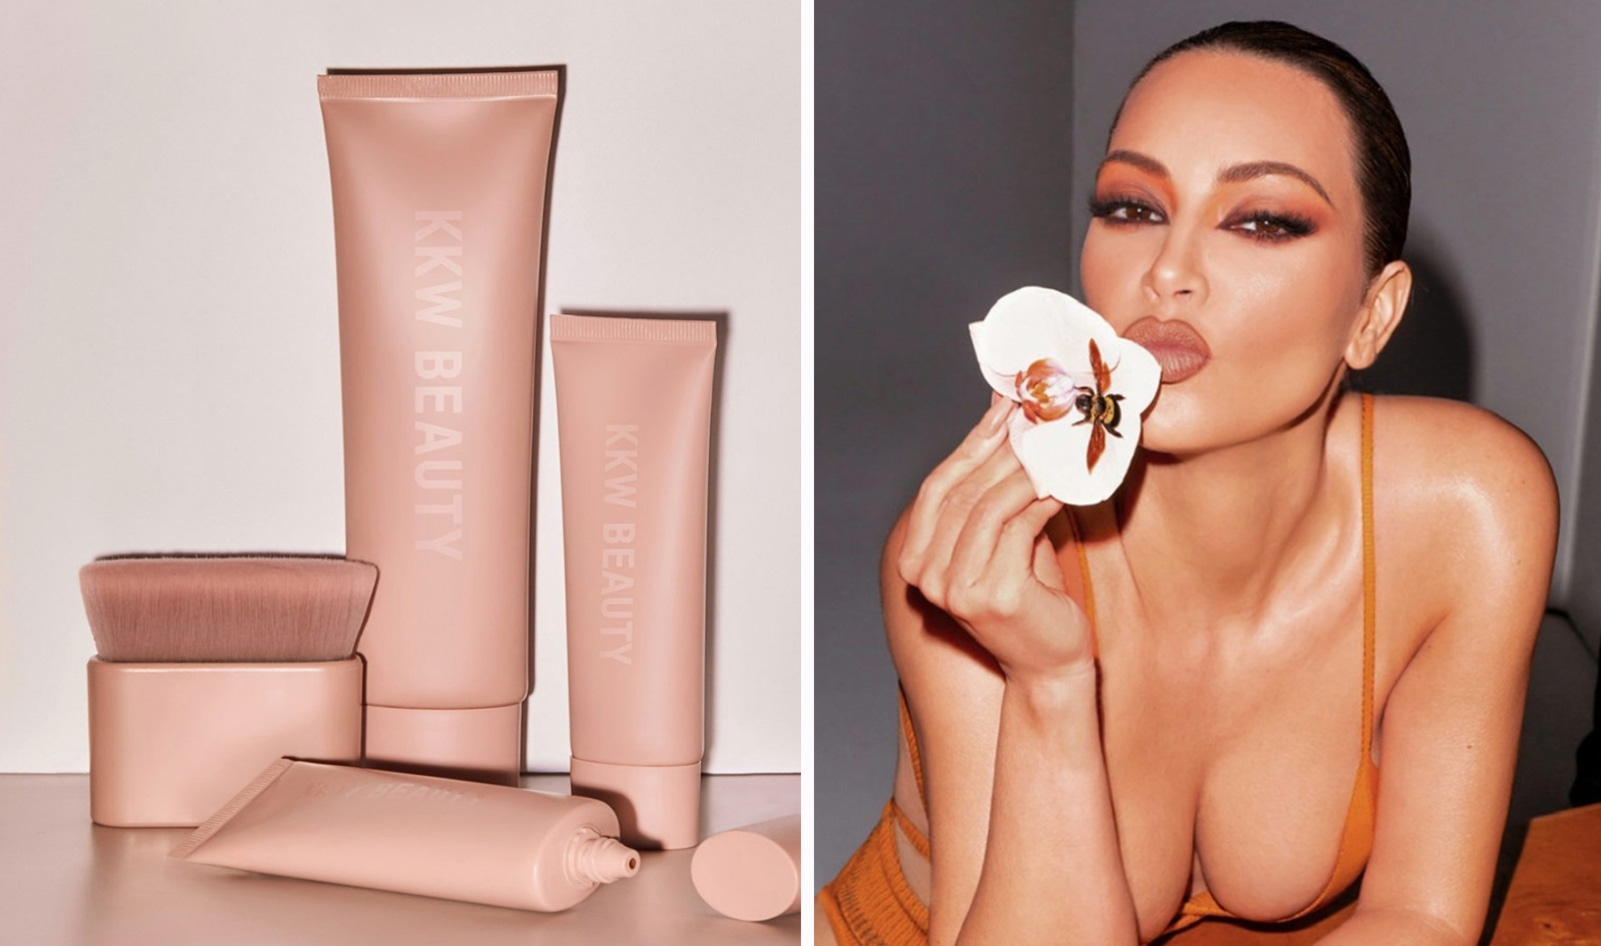 Is Kim Kardashian’s Beauty Brand Going Vegan? Here Is What We Know.